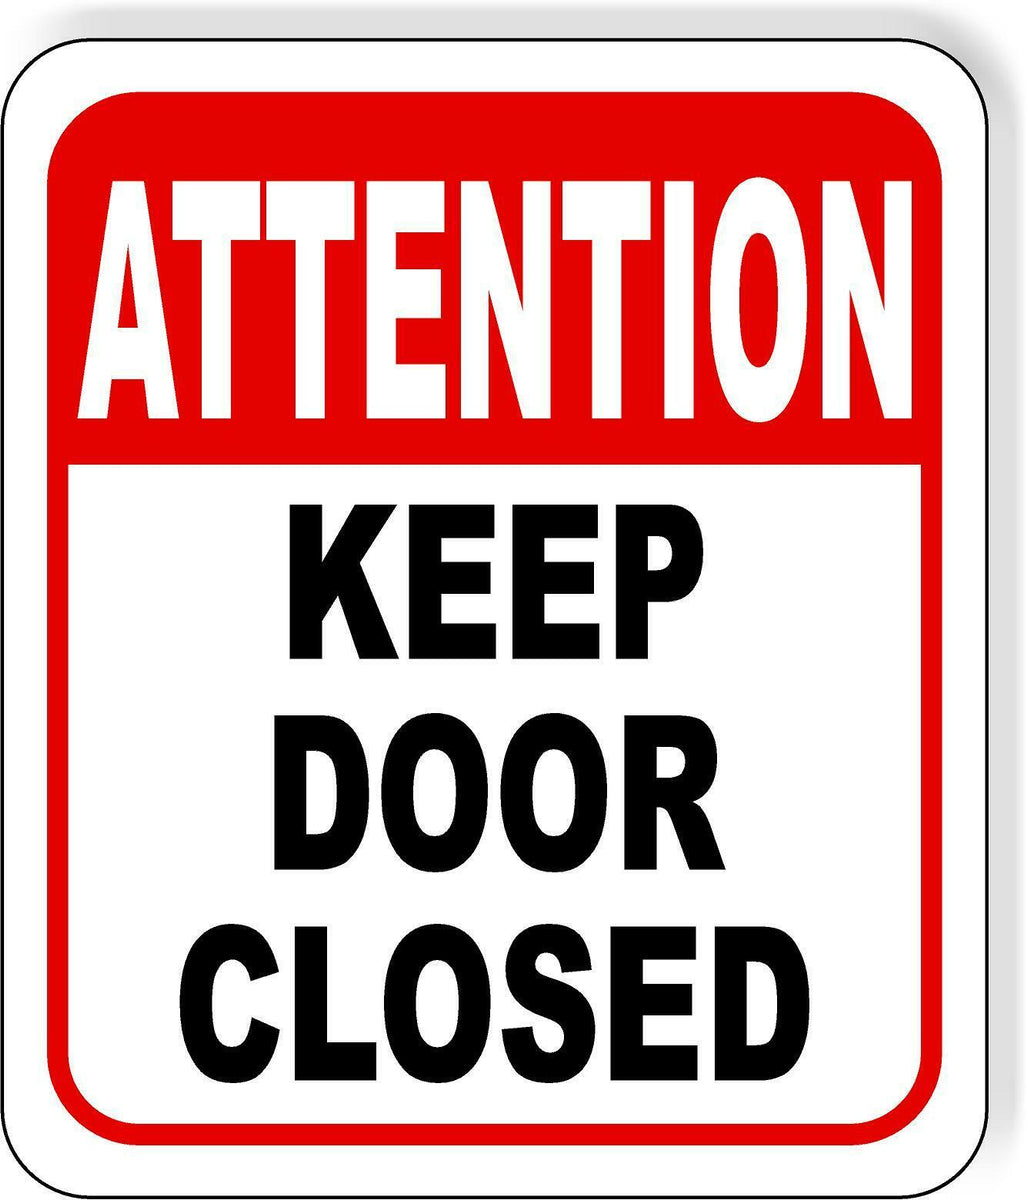 Notice Please Keep This Door Closed At All Times Sign, SKU: S-8234